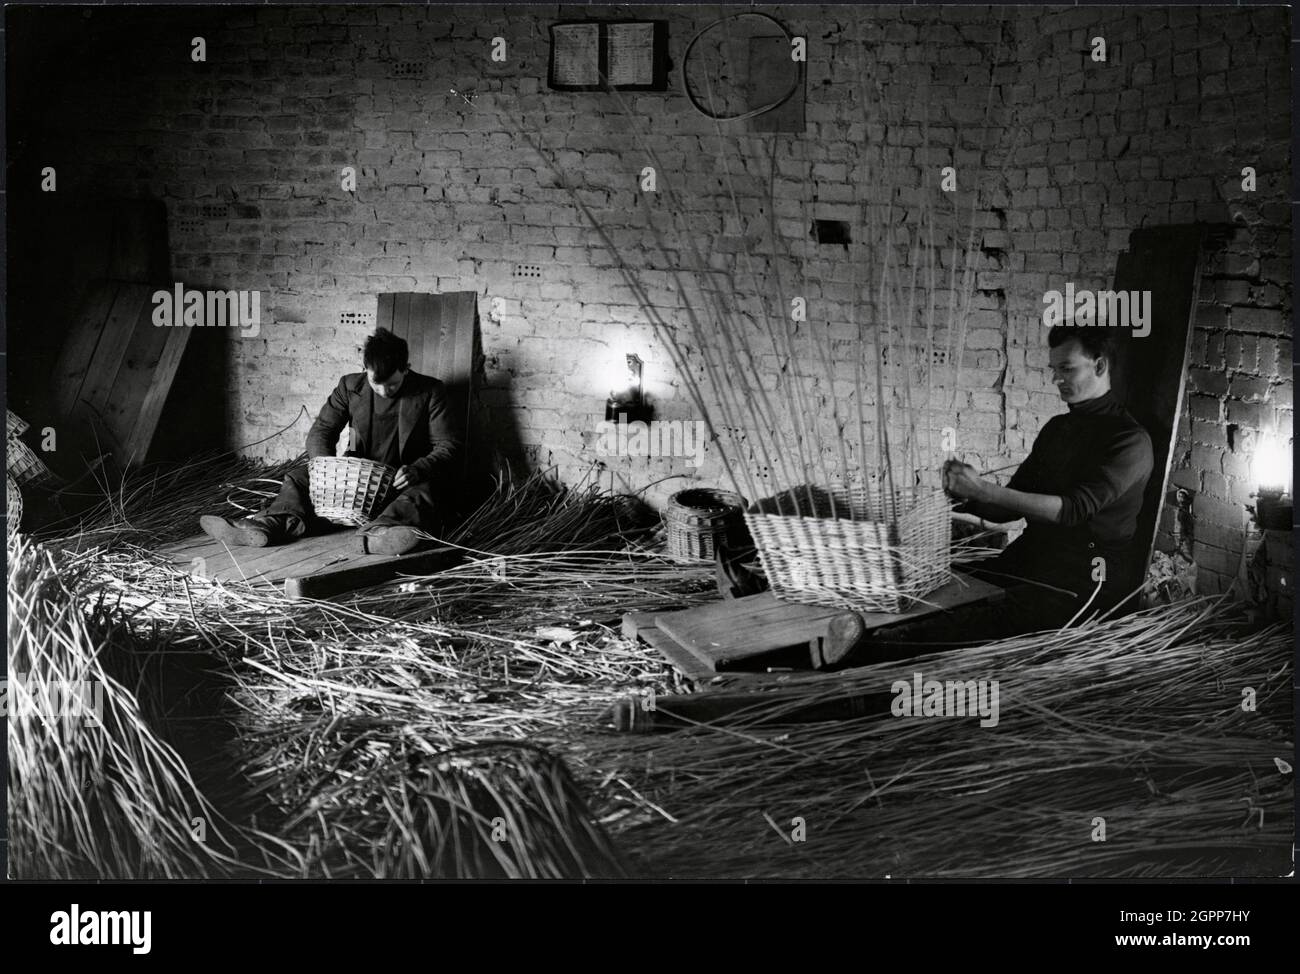 Basket makers, King's Sedge Moor, High Ham, South Somerset, Somerset, 1930s. Basket weavers at work in a small factory on King's Sedge Moor. The caption on the reverse of the print states: &quot;Basket workers working with only small oil lamps to keep the room at an even temperature&quot;. Stock Photo